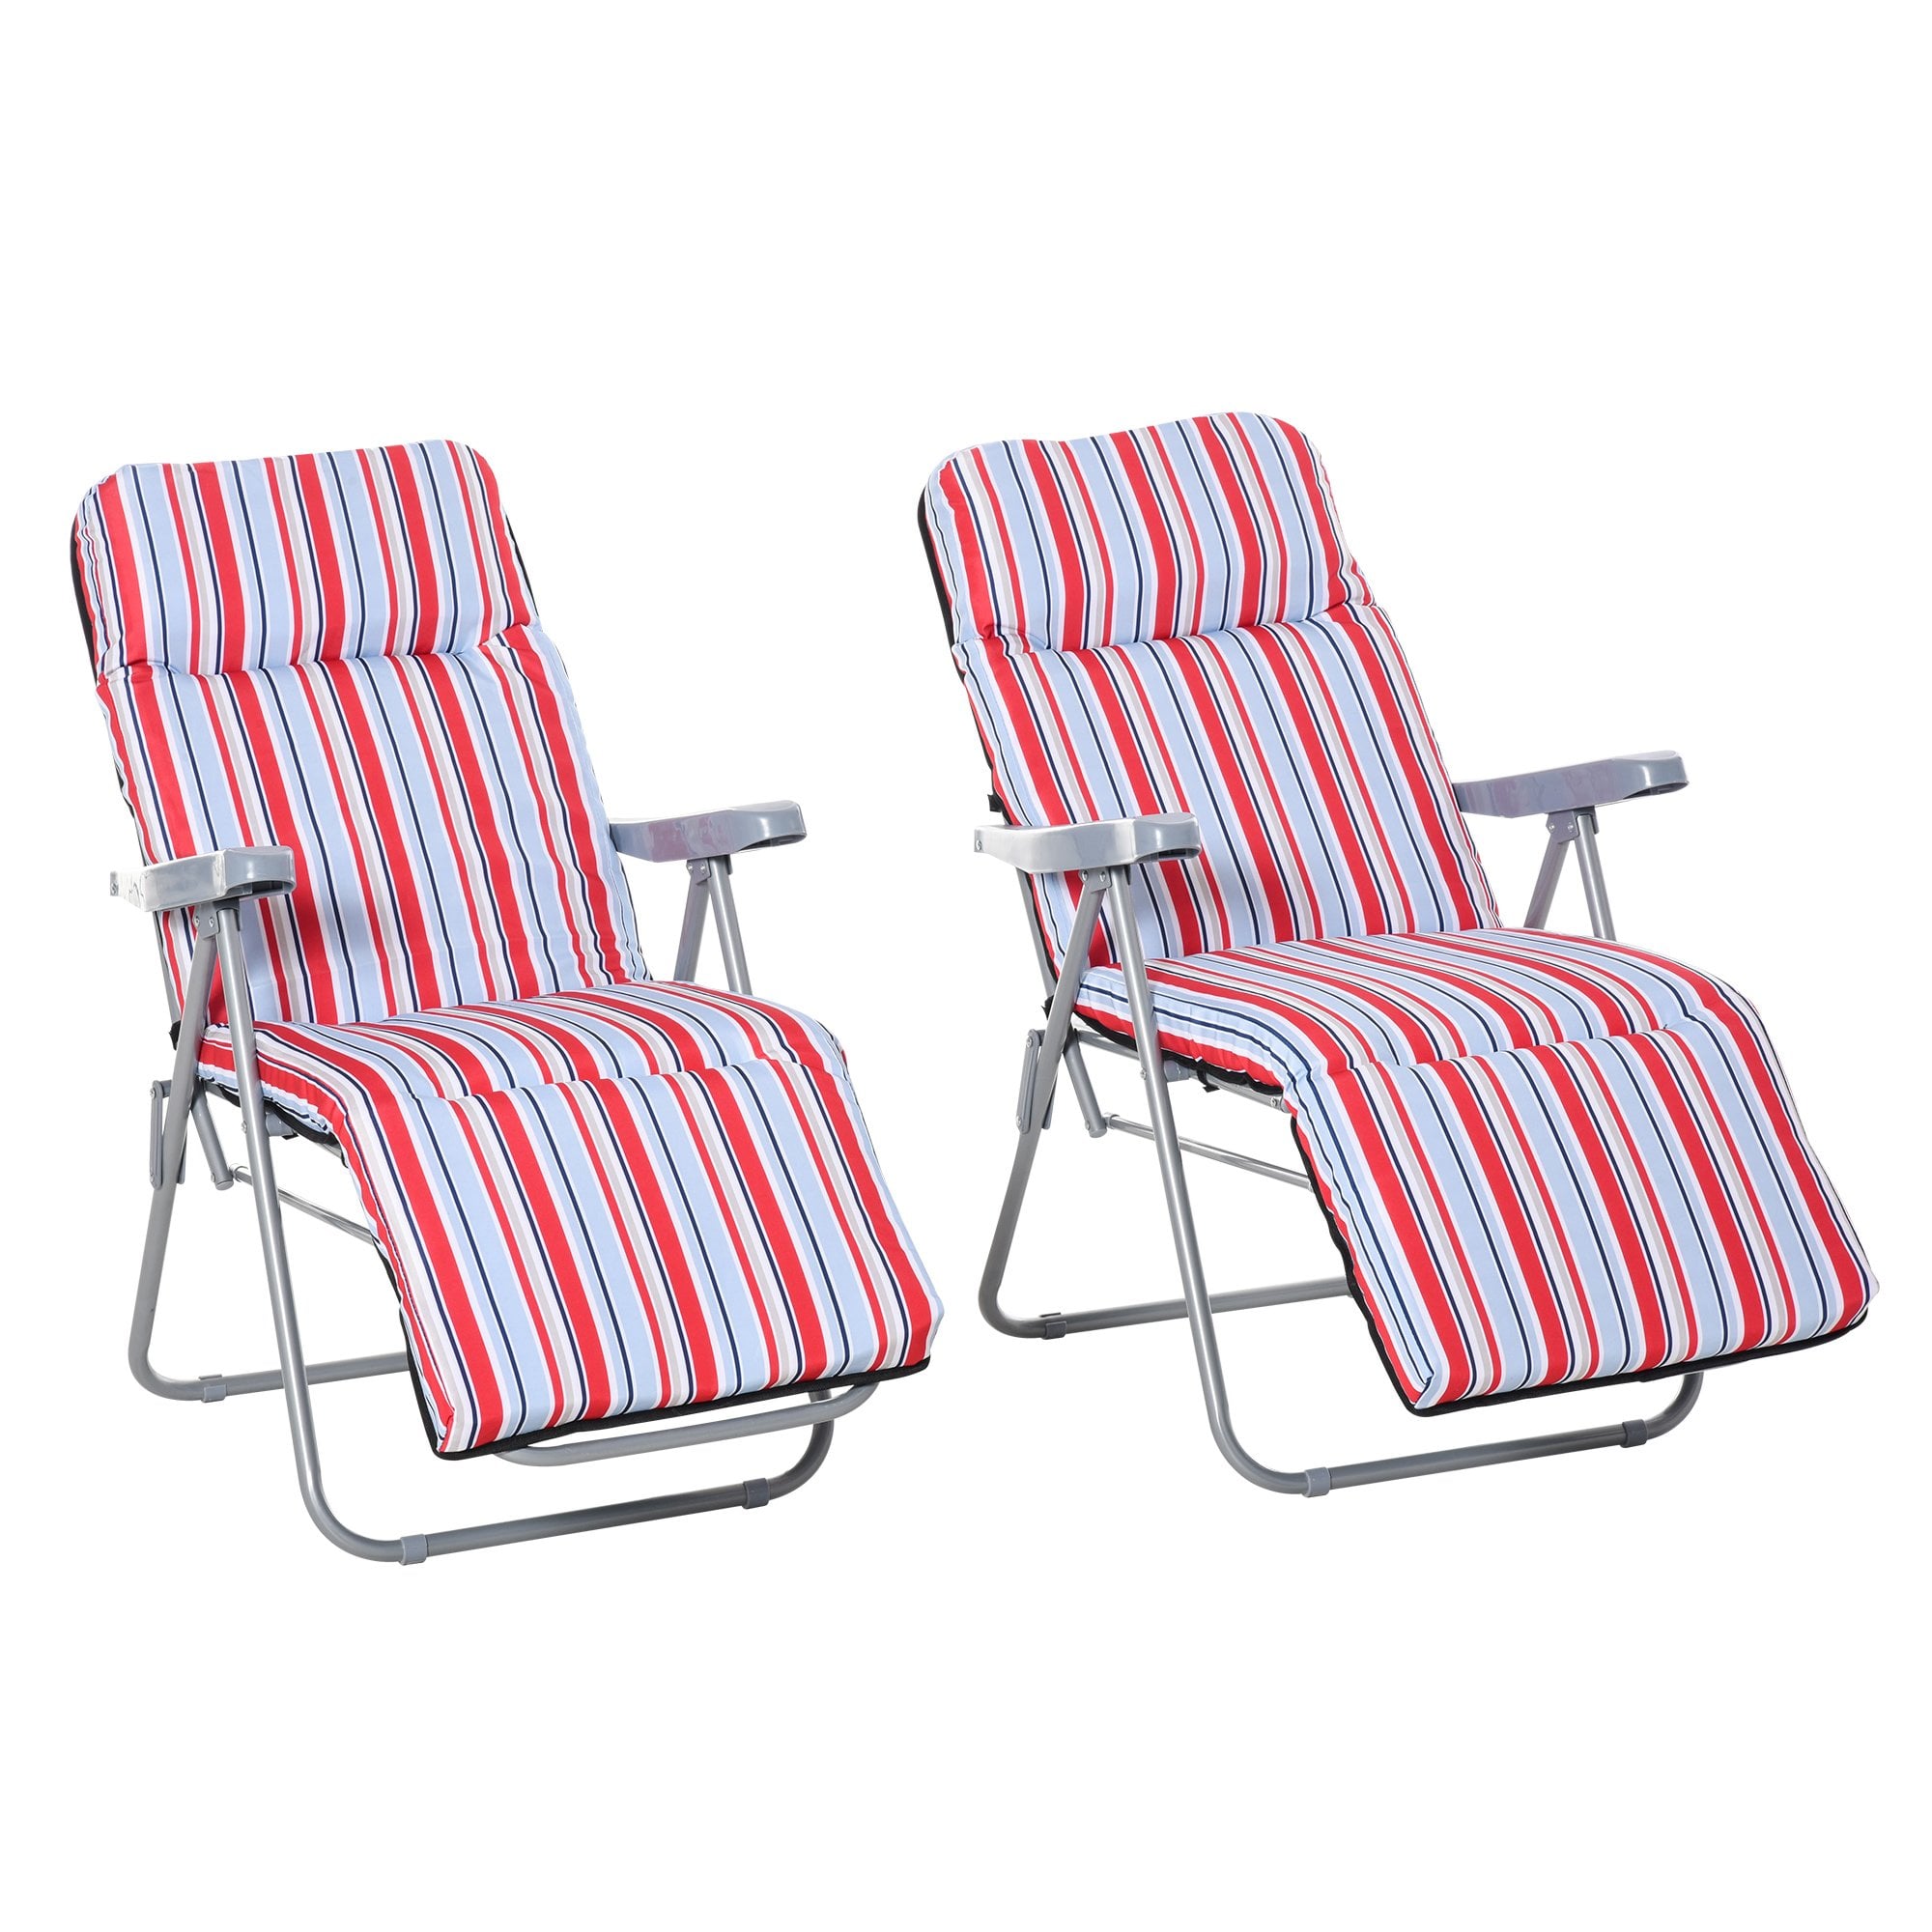 Outsunny Lounger Set - Red/White Garden Loungers  | TJ Hughes White